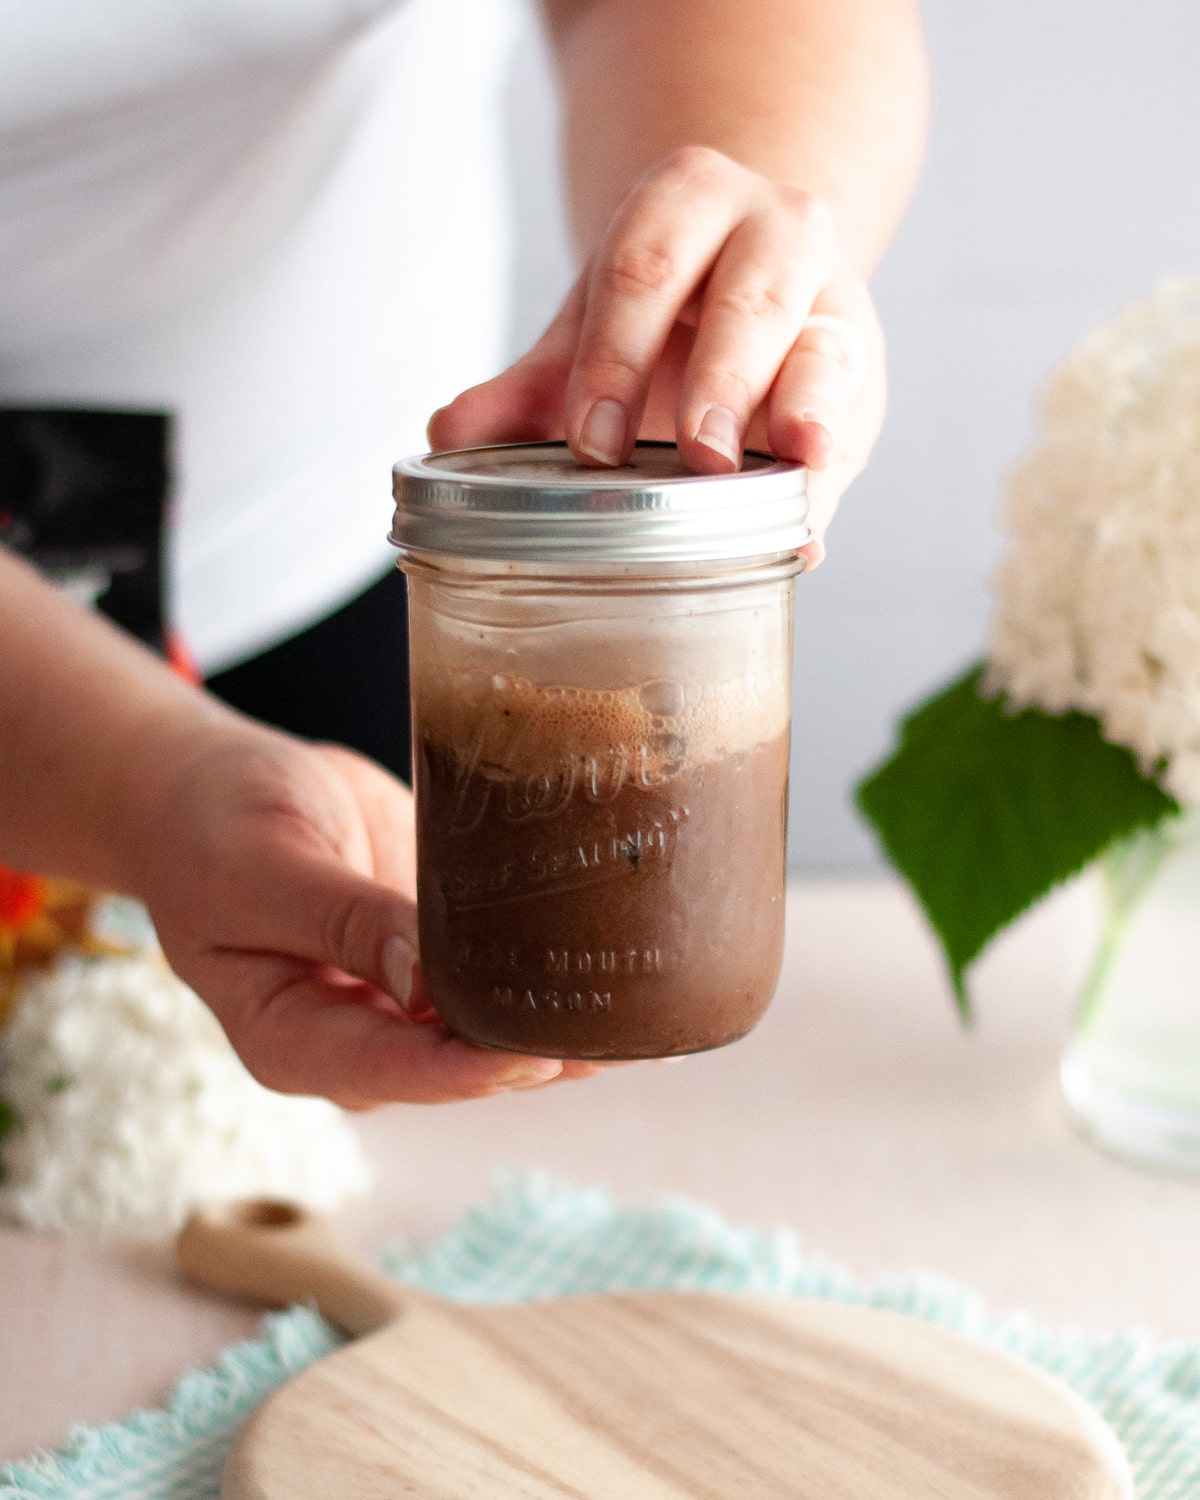 process shot showing how to make an iced chocolate almondmilk shaken espresso. here the chocolate malted milk powder, espresso, and ice are being shaken vigorously in a mason jar that is tightly sealed.